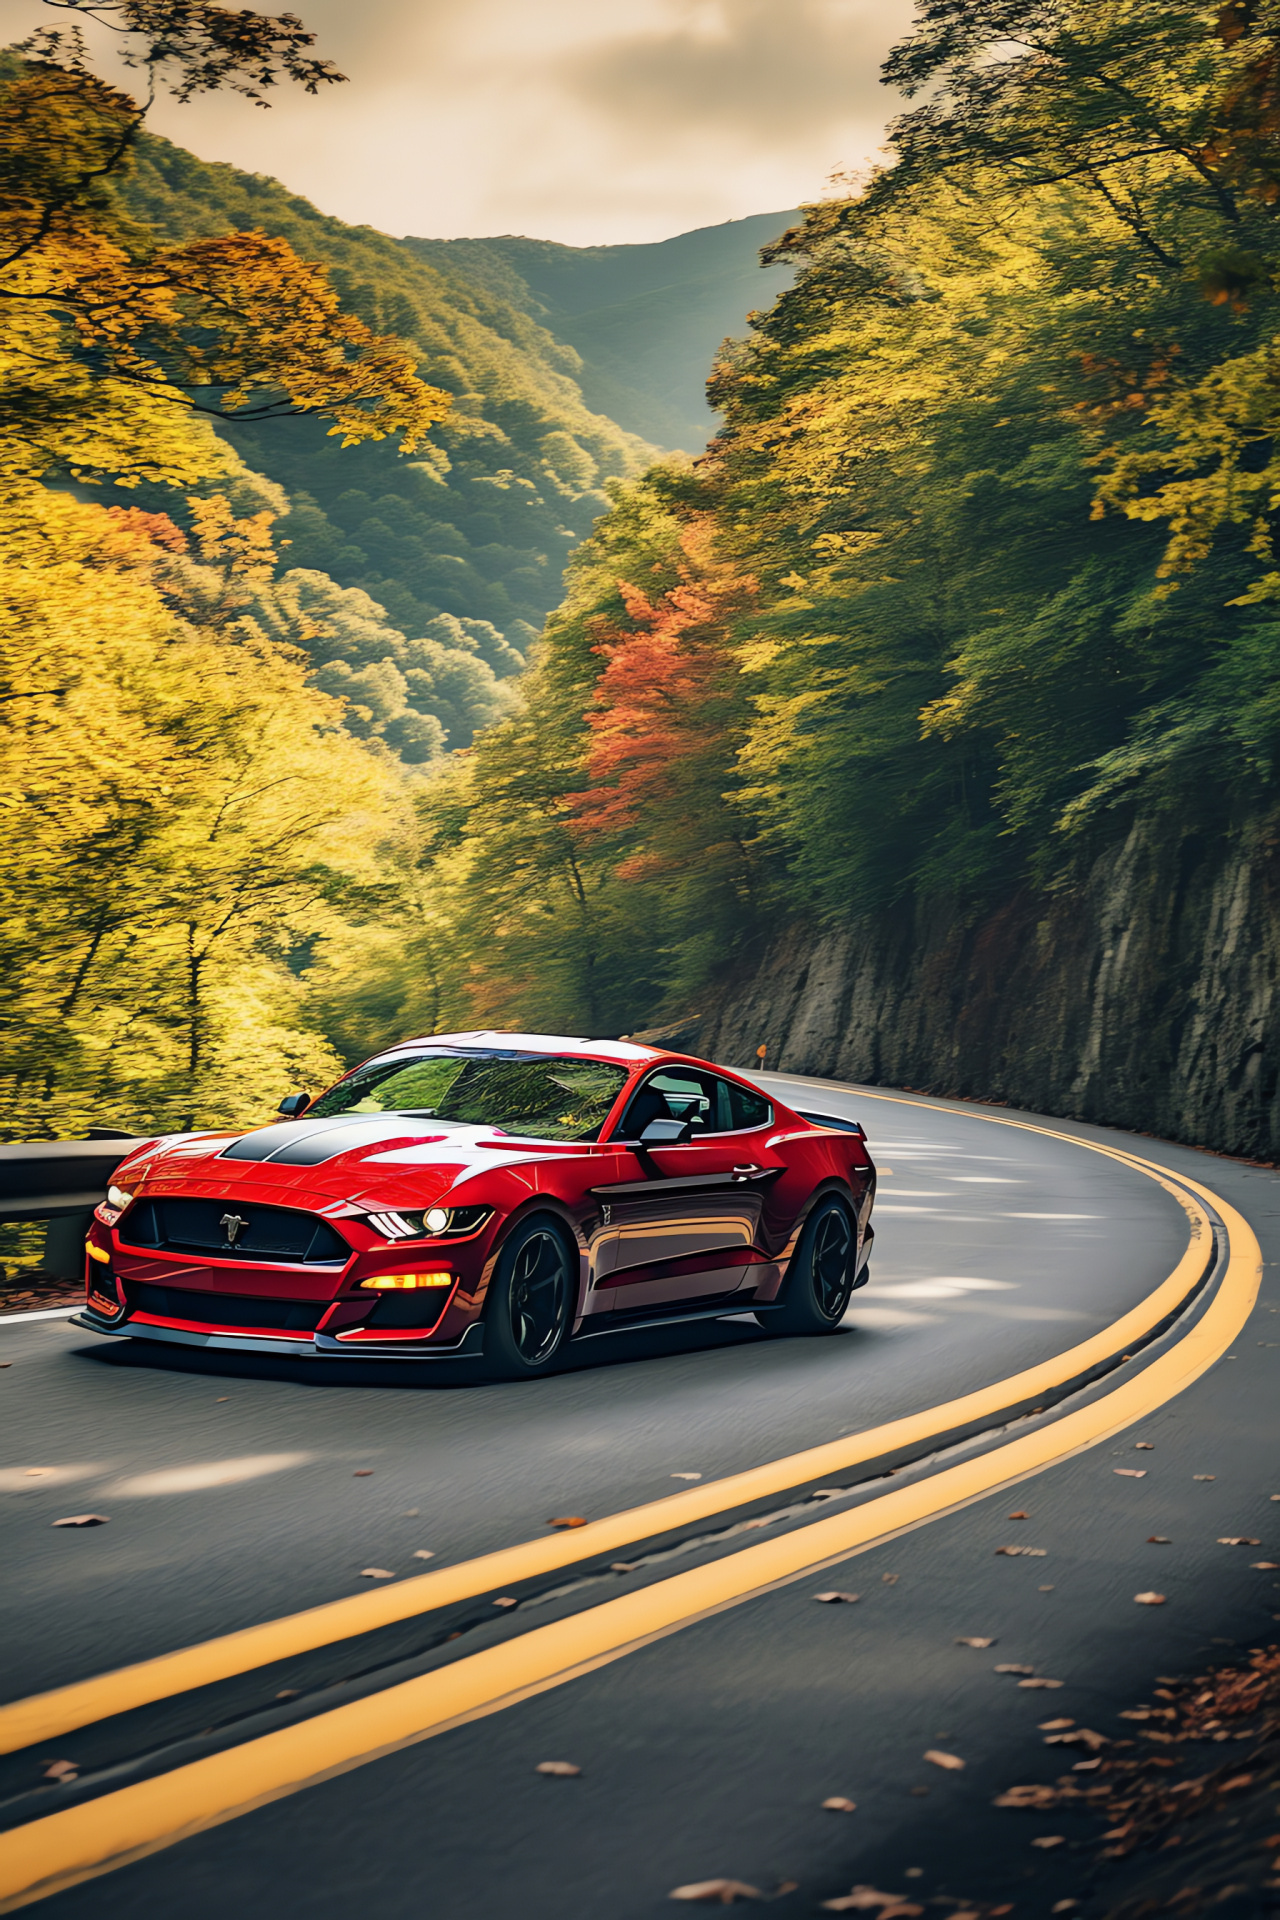 Ford Mustang Shelby, Mountainous backdrop, Asphalt adventures, American muscle, V8 powerhouse, HD Phone Image